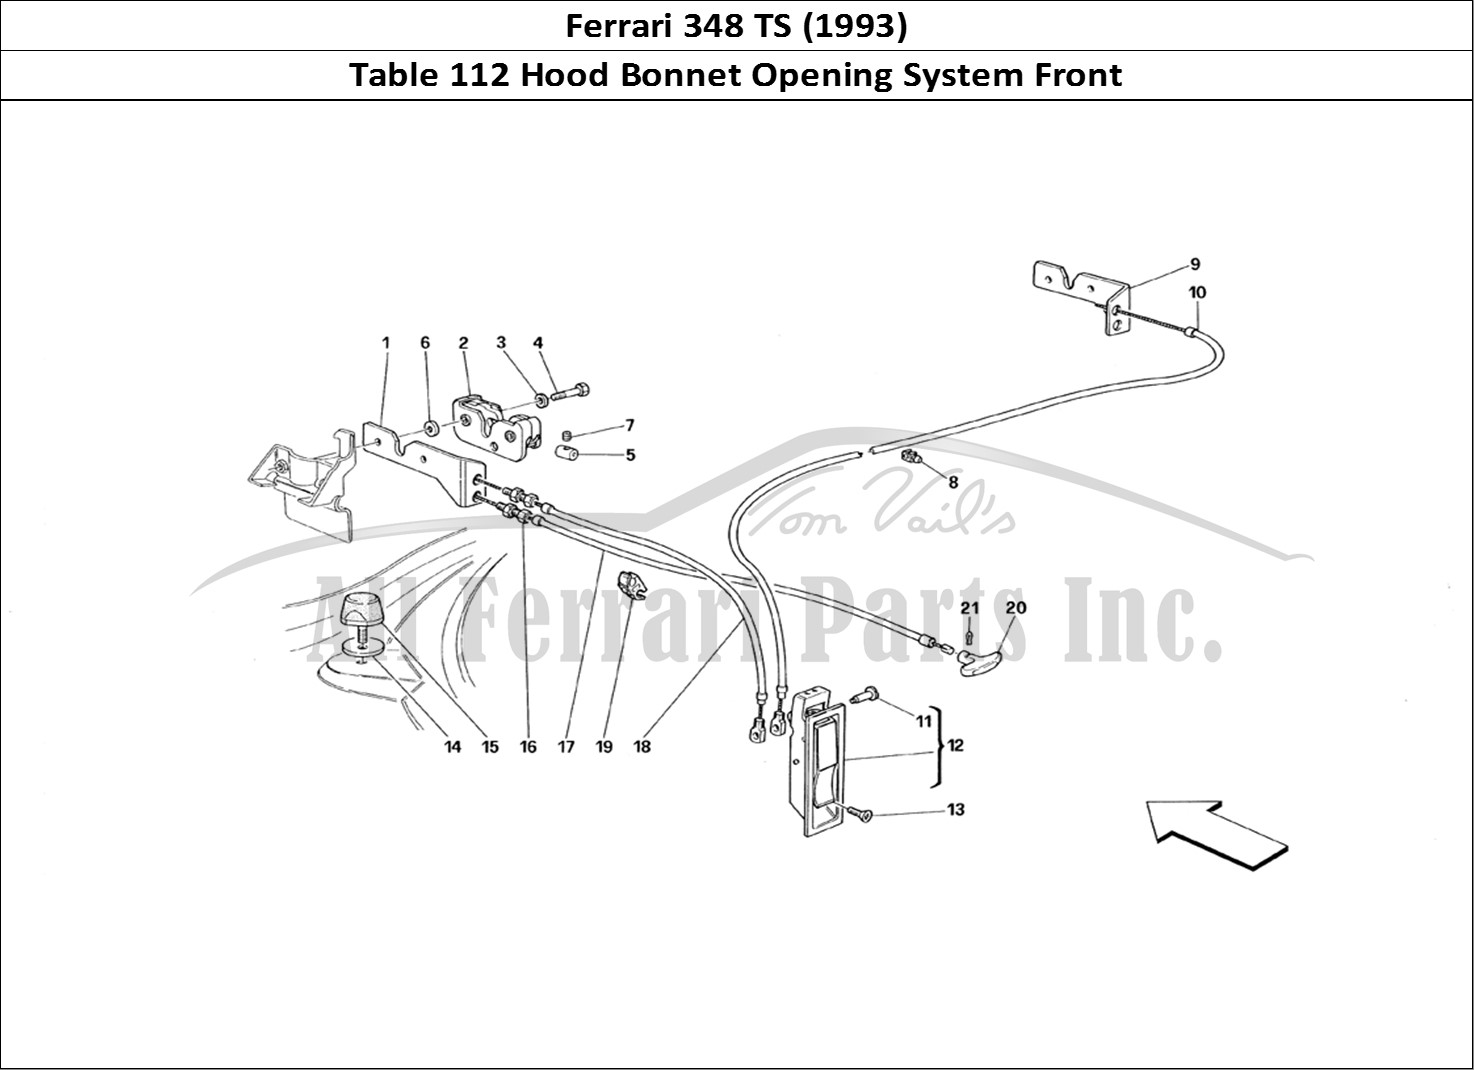 Ferrari Parts Ferrari 348 TB (1993) Page 112 Opening Device for Front